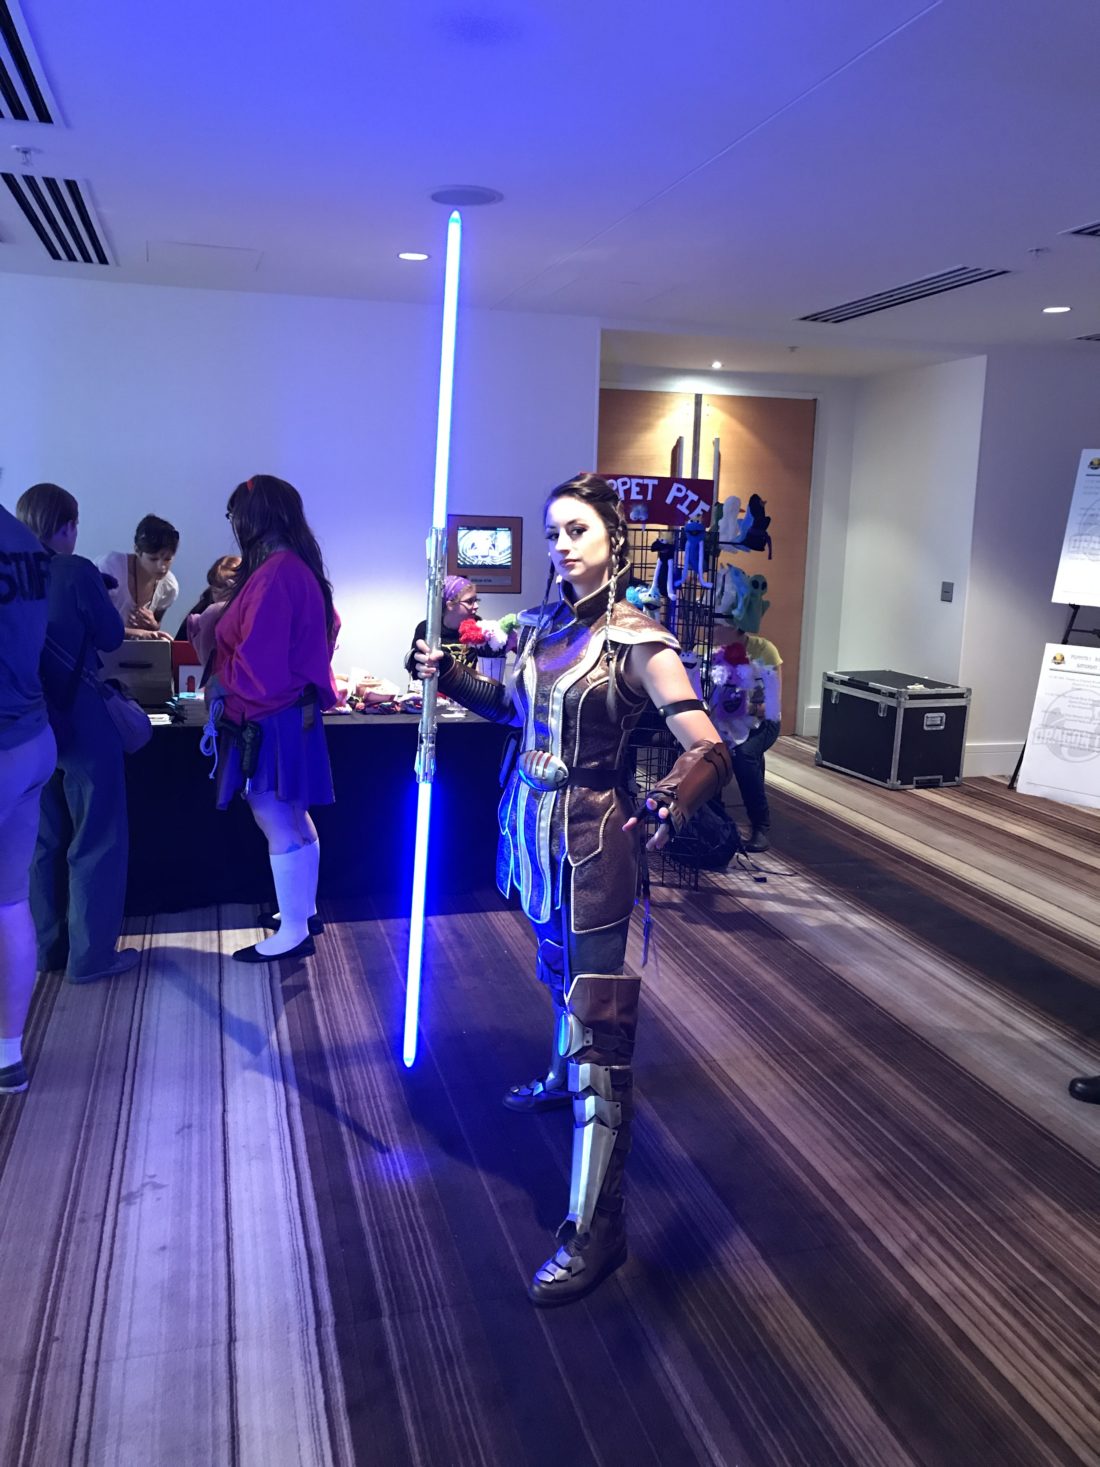 Dragon Con 17′ CosViews:  The Force was strong at Dragon Con